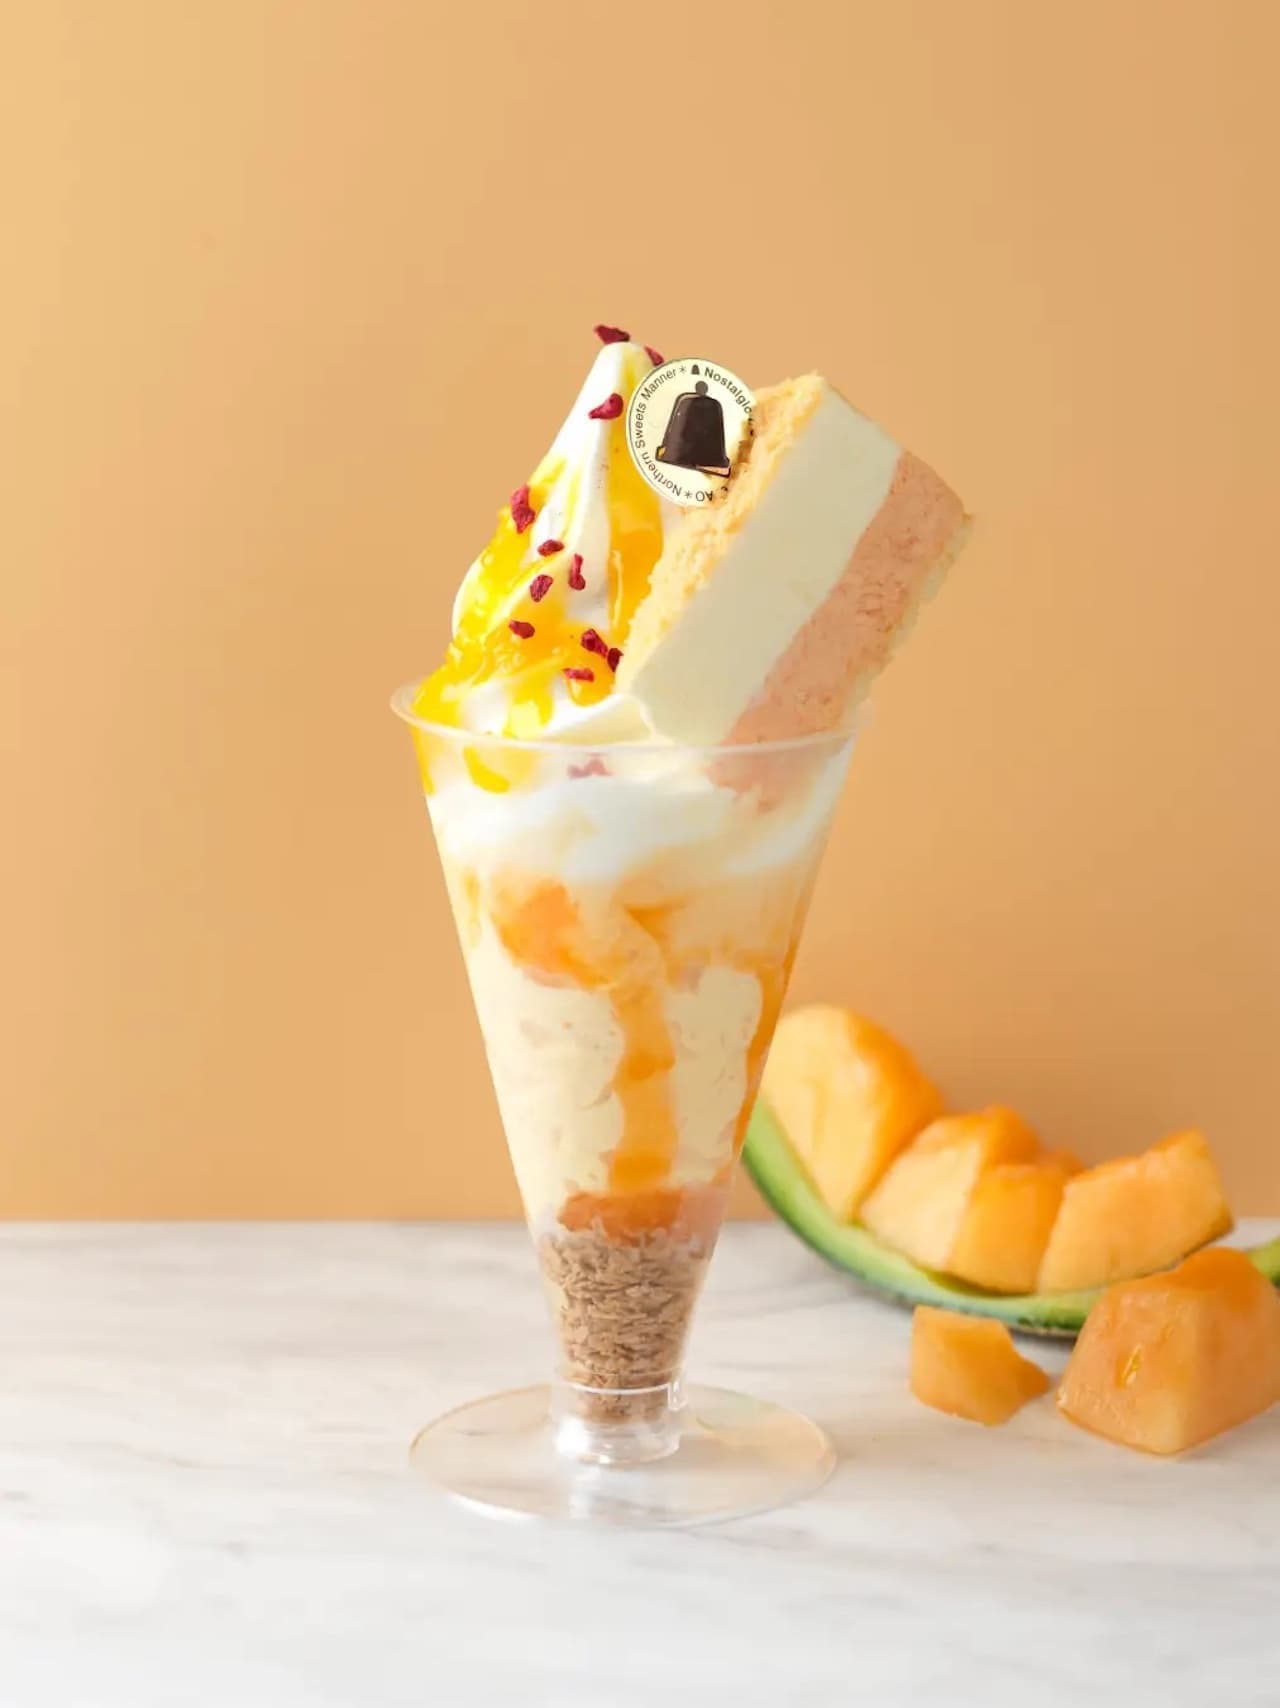 Lutao New Chitose Airport "Mousse Fromage Parfait - Tropical Melon